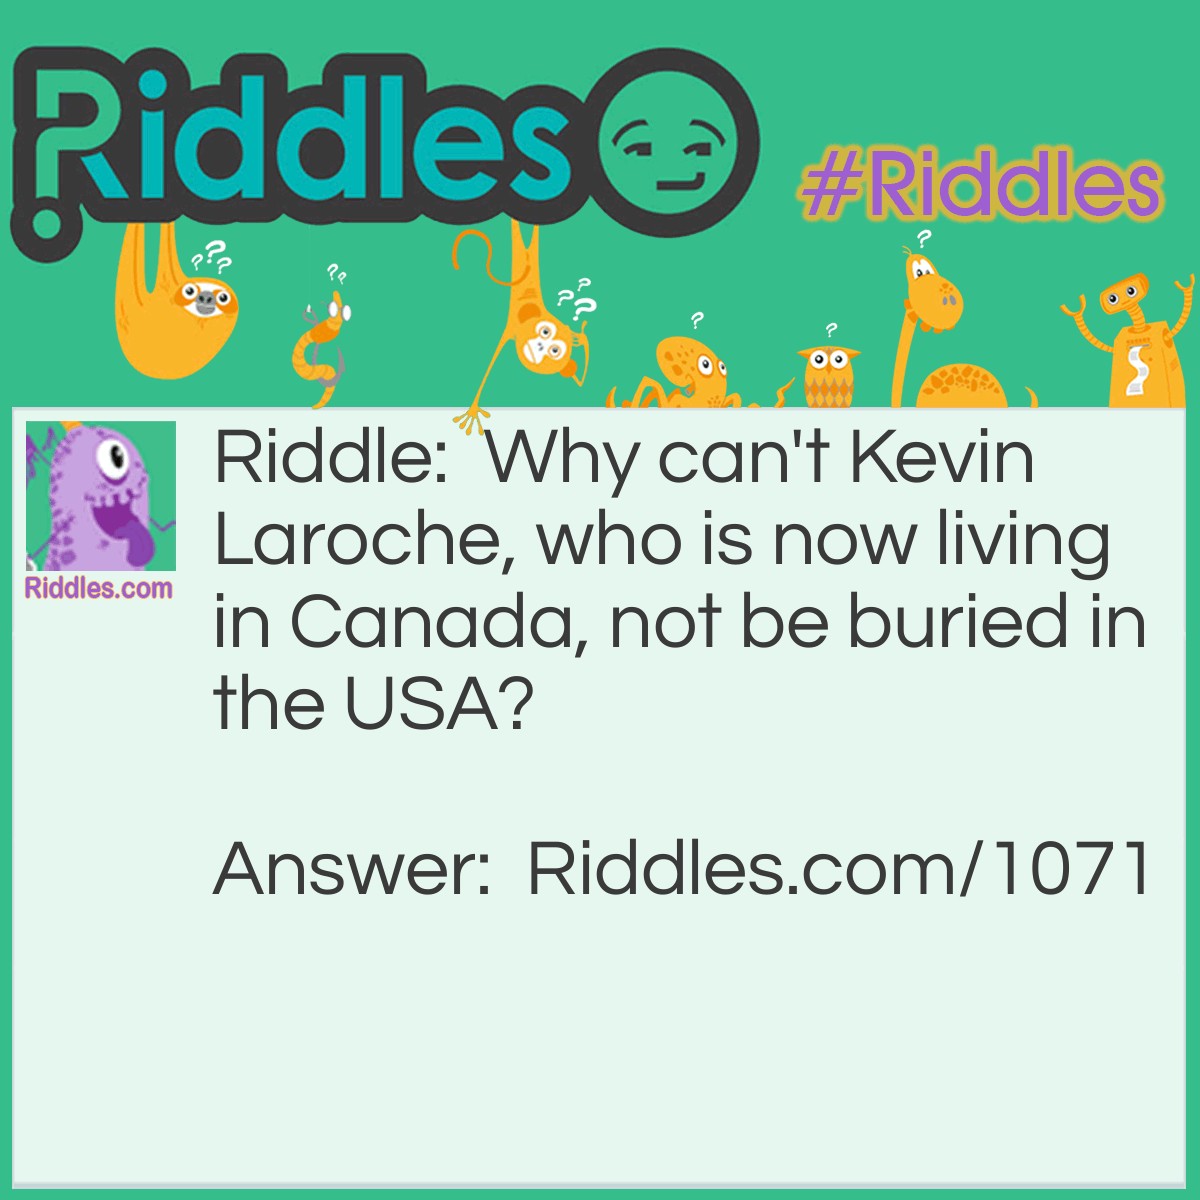 Riddle: Why can't Kevin Laroche, who is now living in Canada, not be buried in the USA? Answer: Because he is still alive! He is not dead